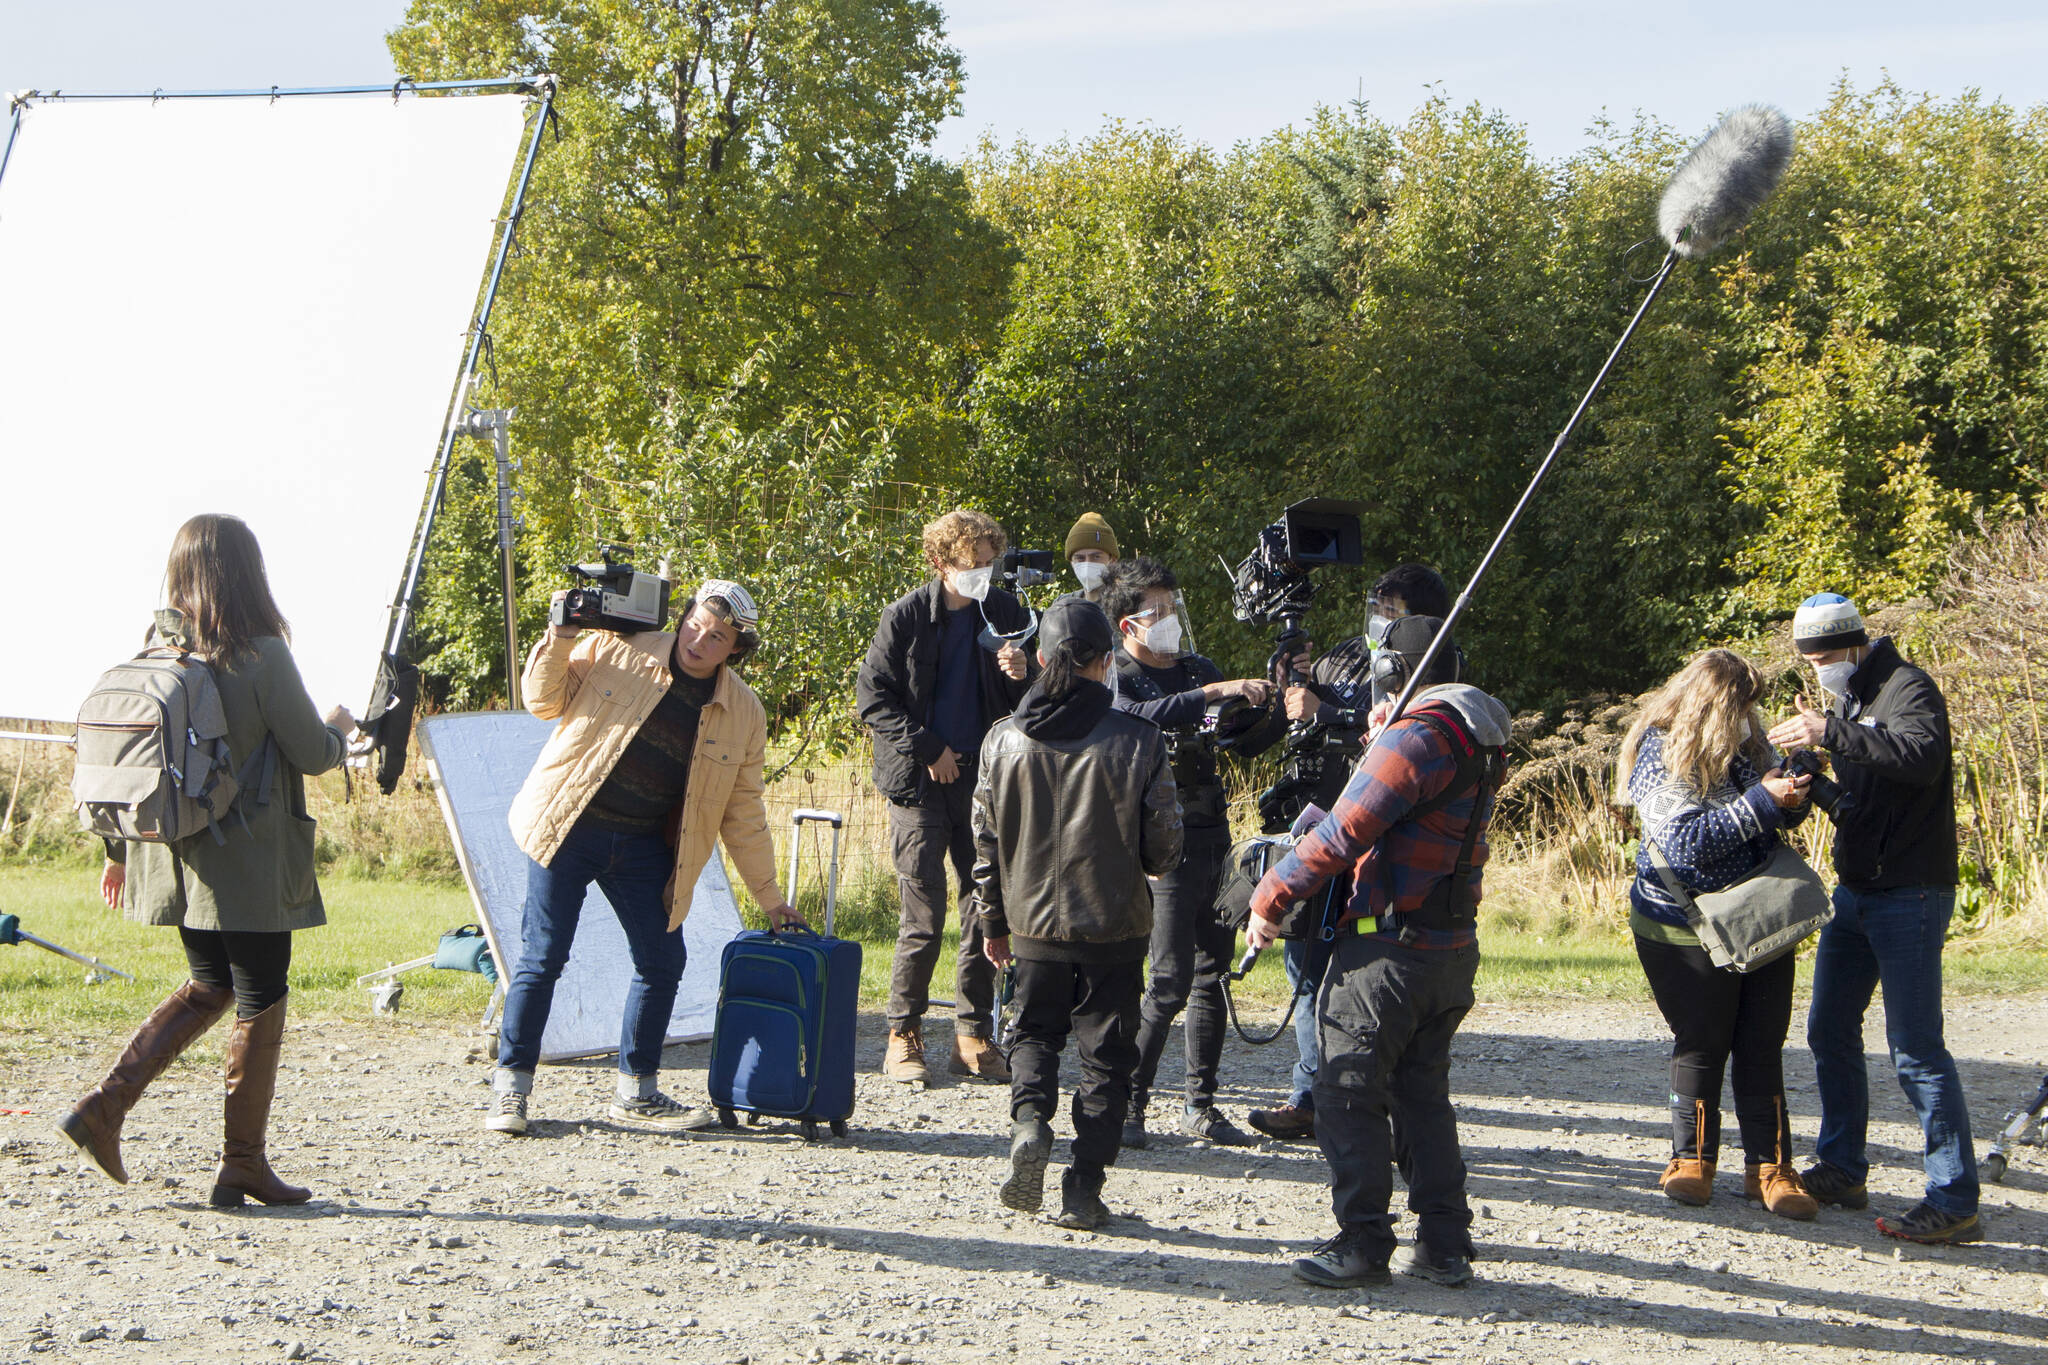 The Cosmic Hamlet Entertainment film crew and actors reset for a scene on the set of “Bolt from the Blue” at the Kilcher Homestead on Sept. 28. (Photo by Sarah Knapp/Homer News)